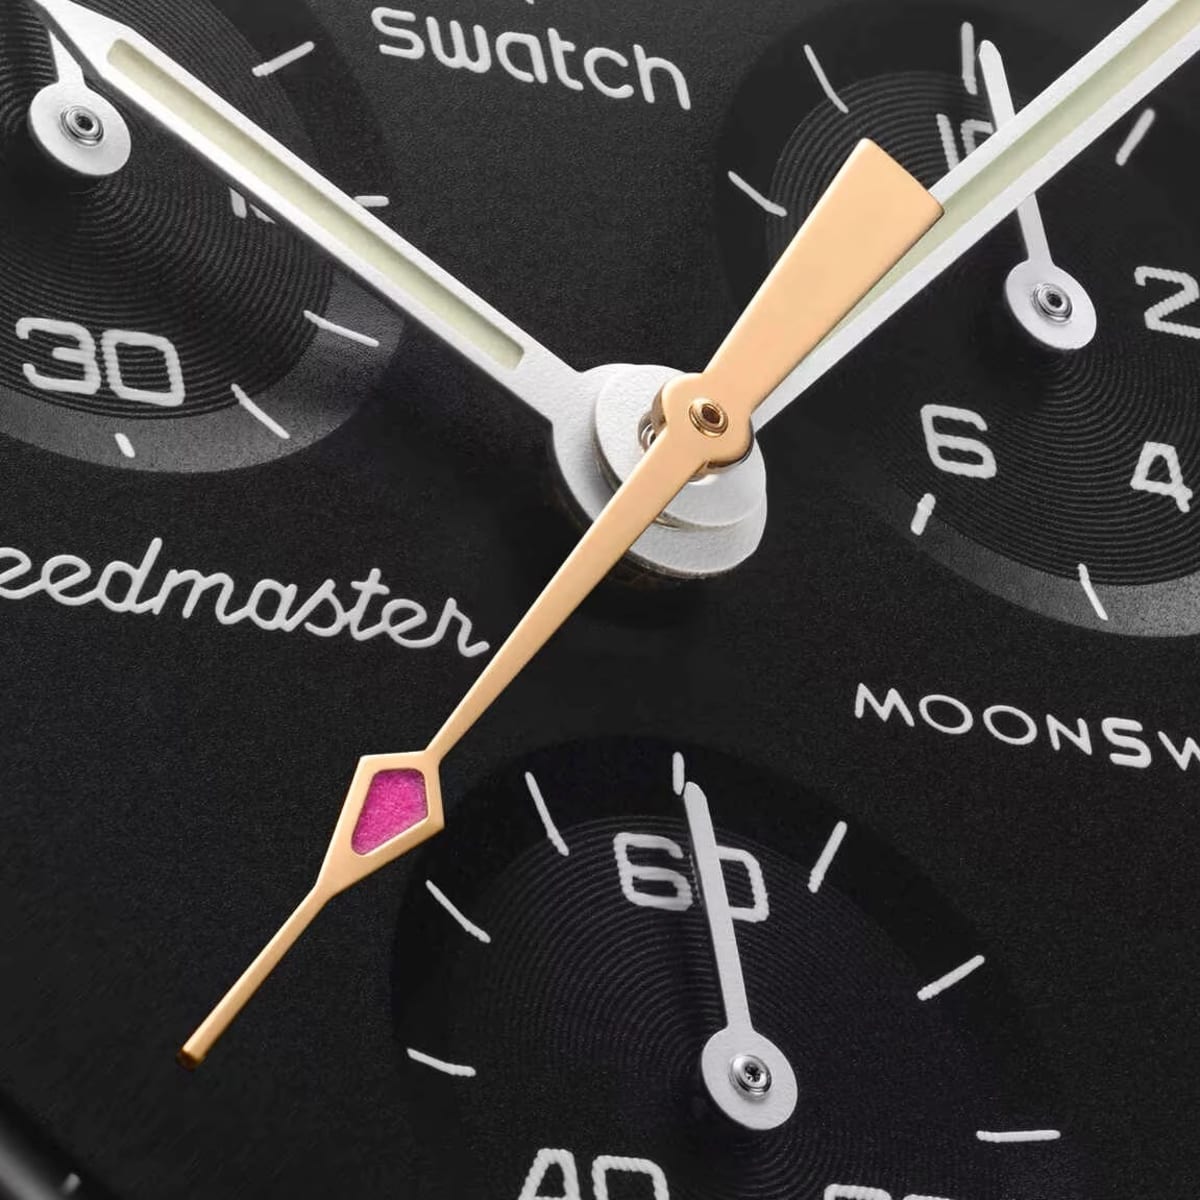 Swatch and Omega release a new variant of the Moonshine Gold 